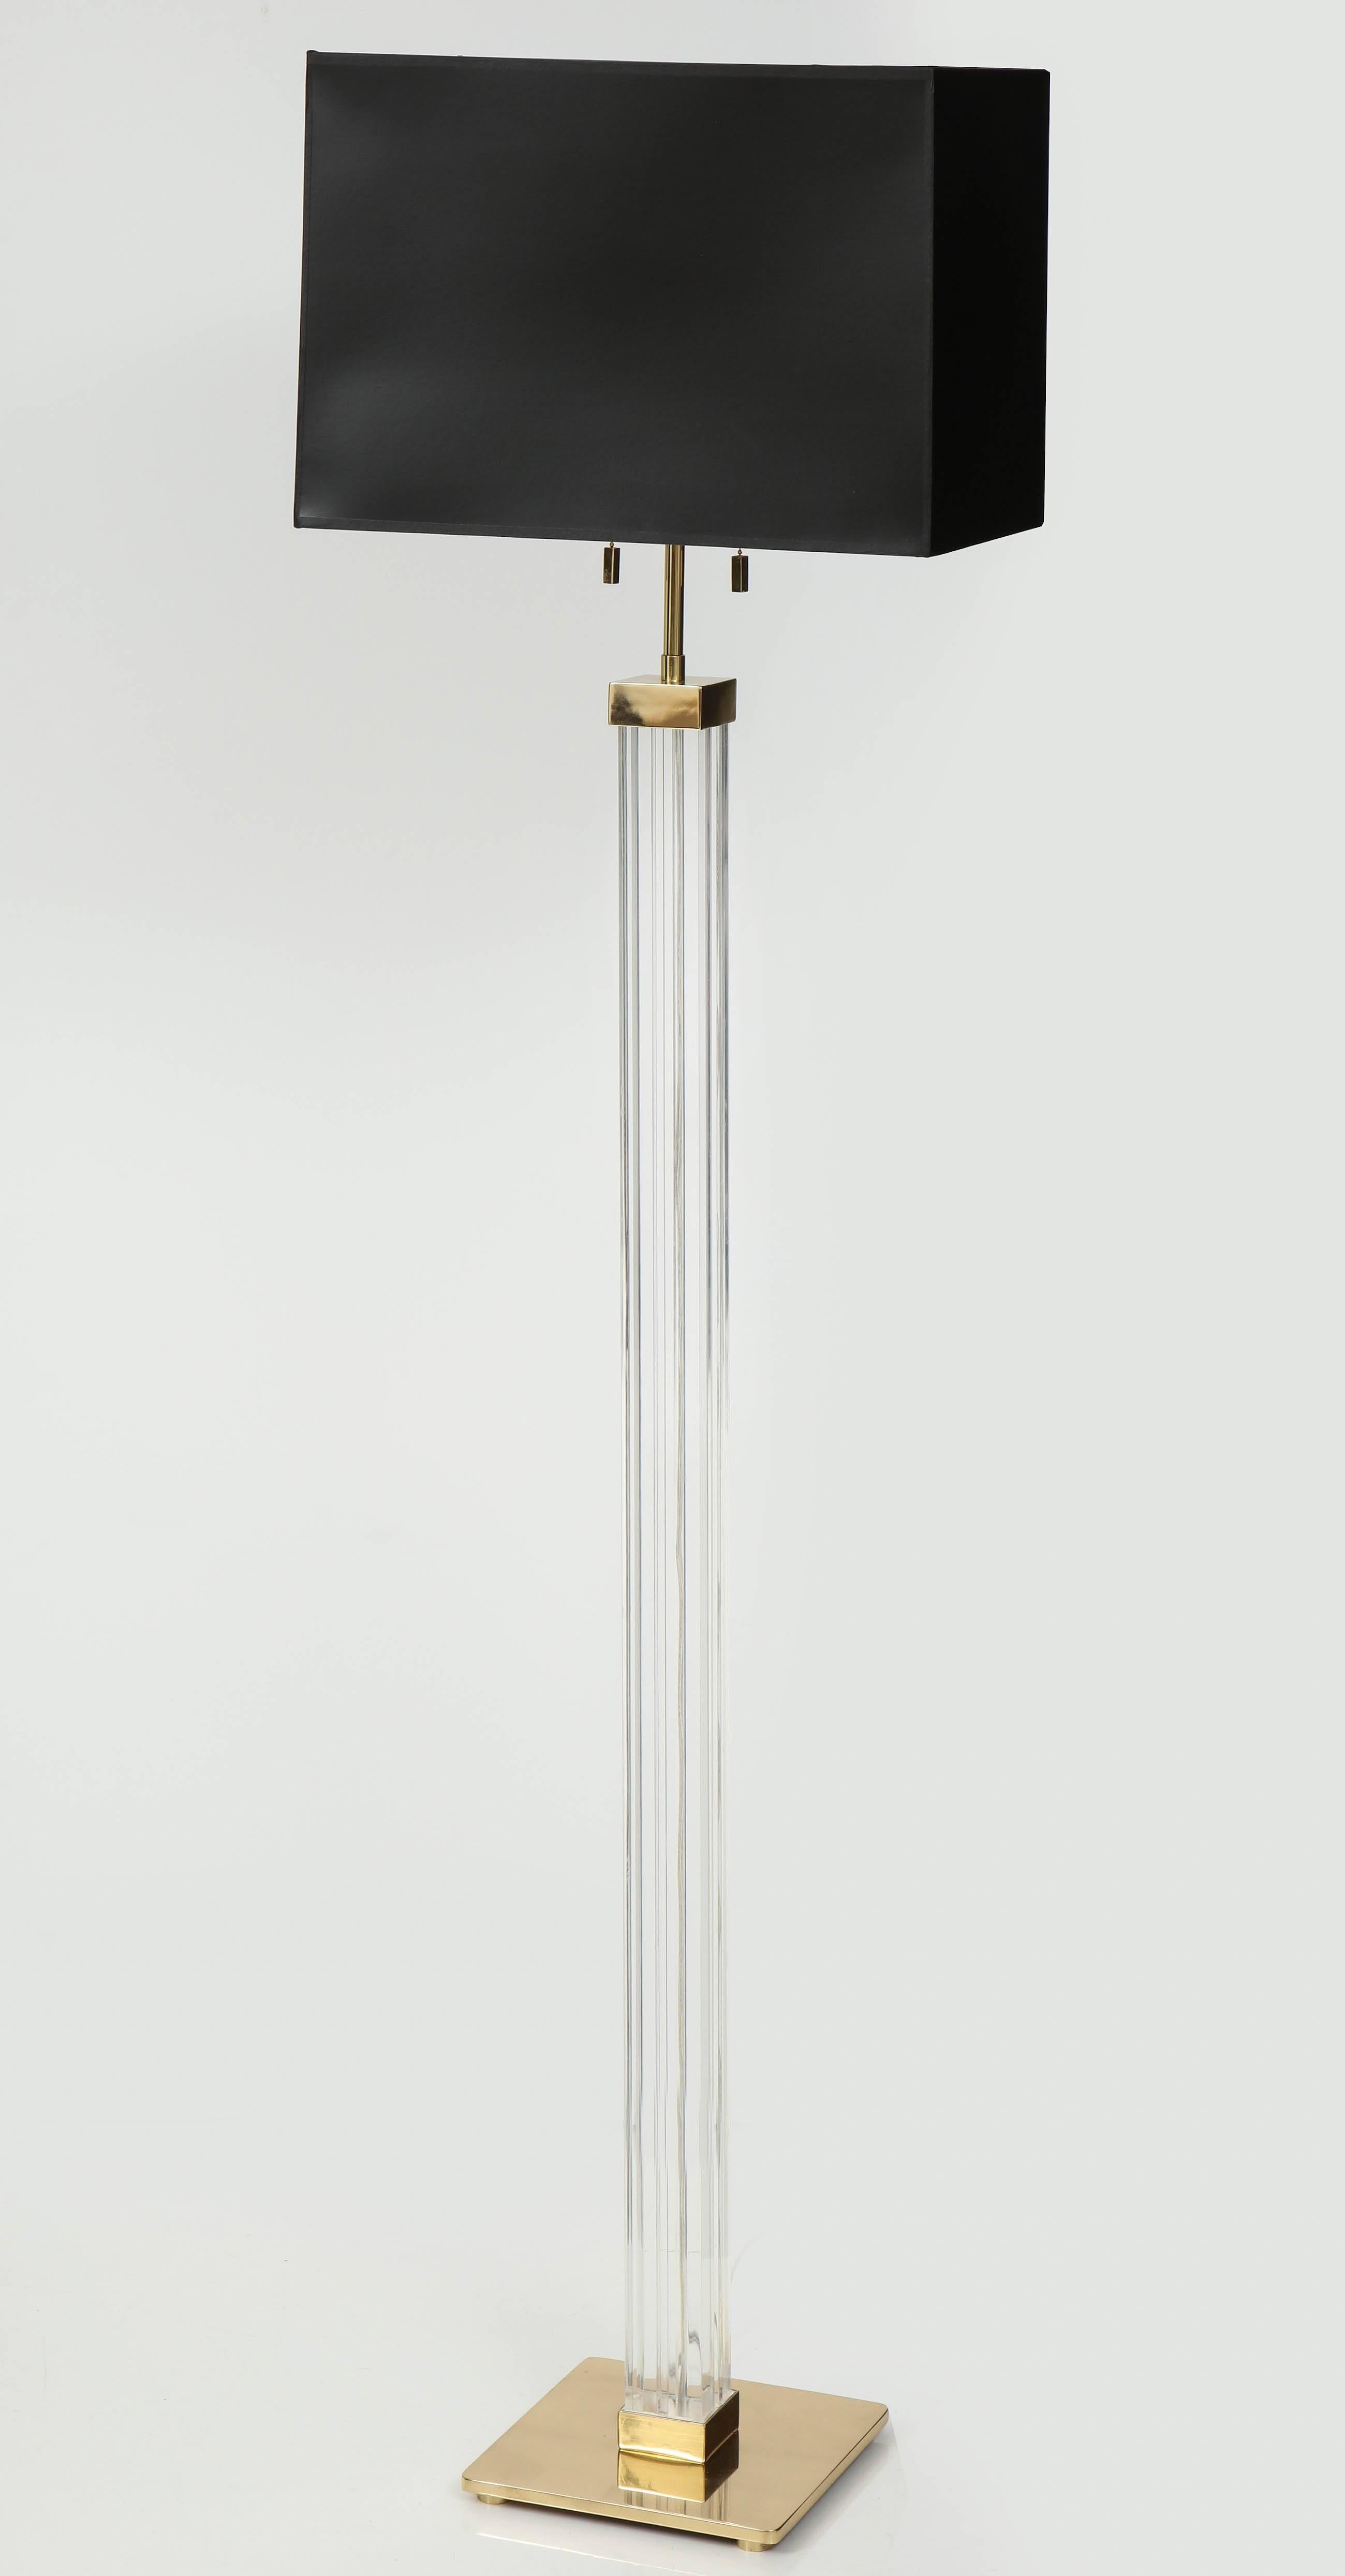 Lucite column floor lamp with a square brass base and double pull chain sockets, designed by Karl Springer. Rewired for use in the USA. Shade not included.